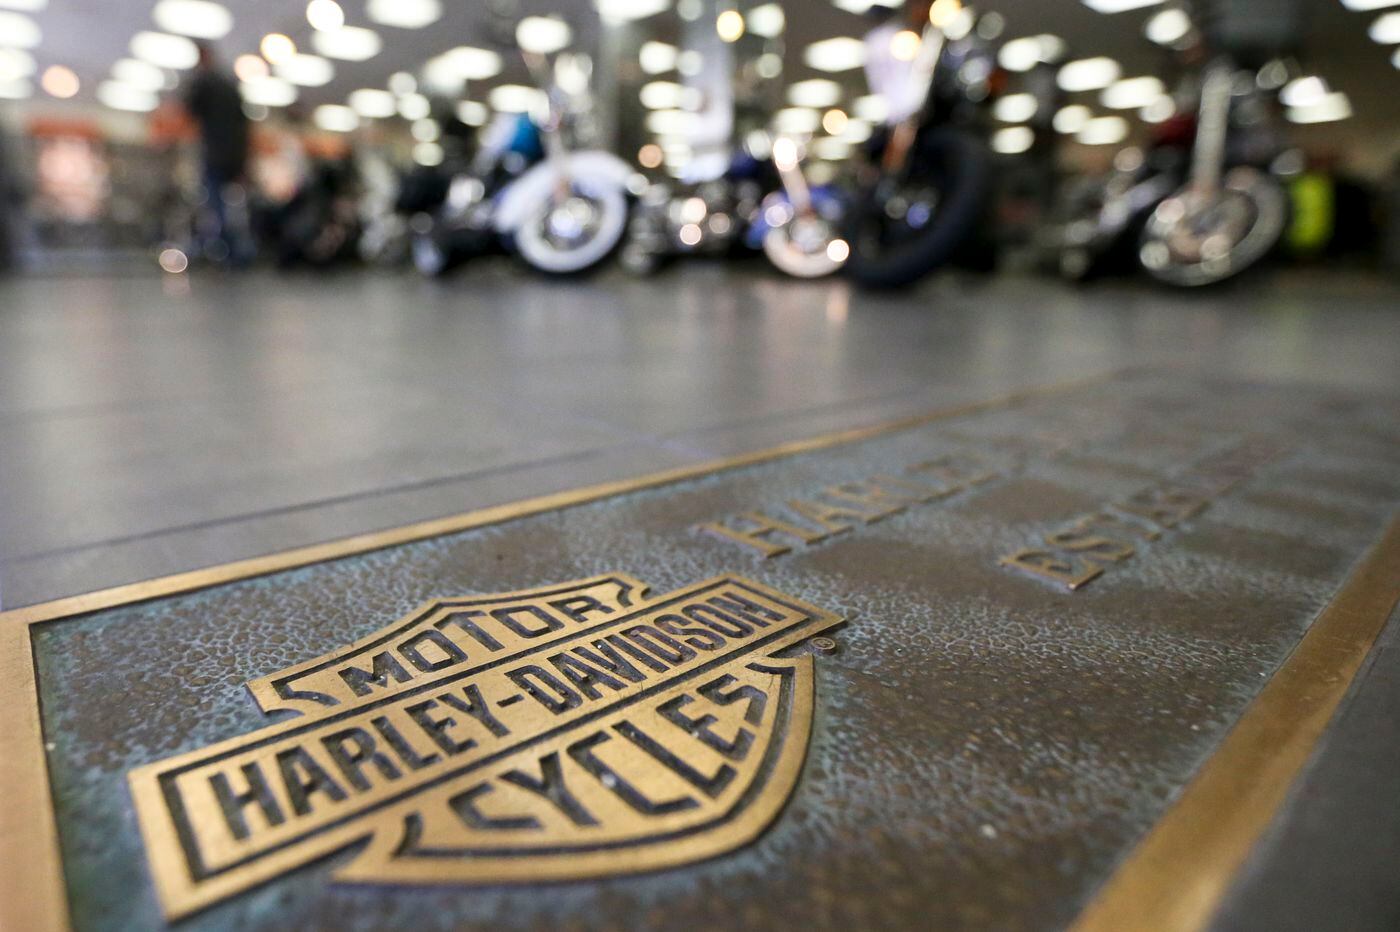 Harley-Davidson could be first of many U.S. firms to shift production